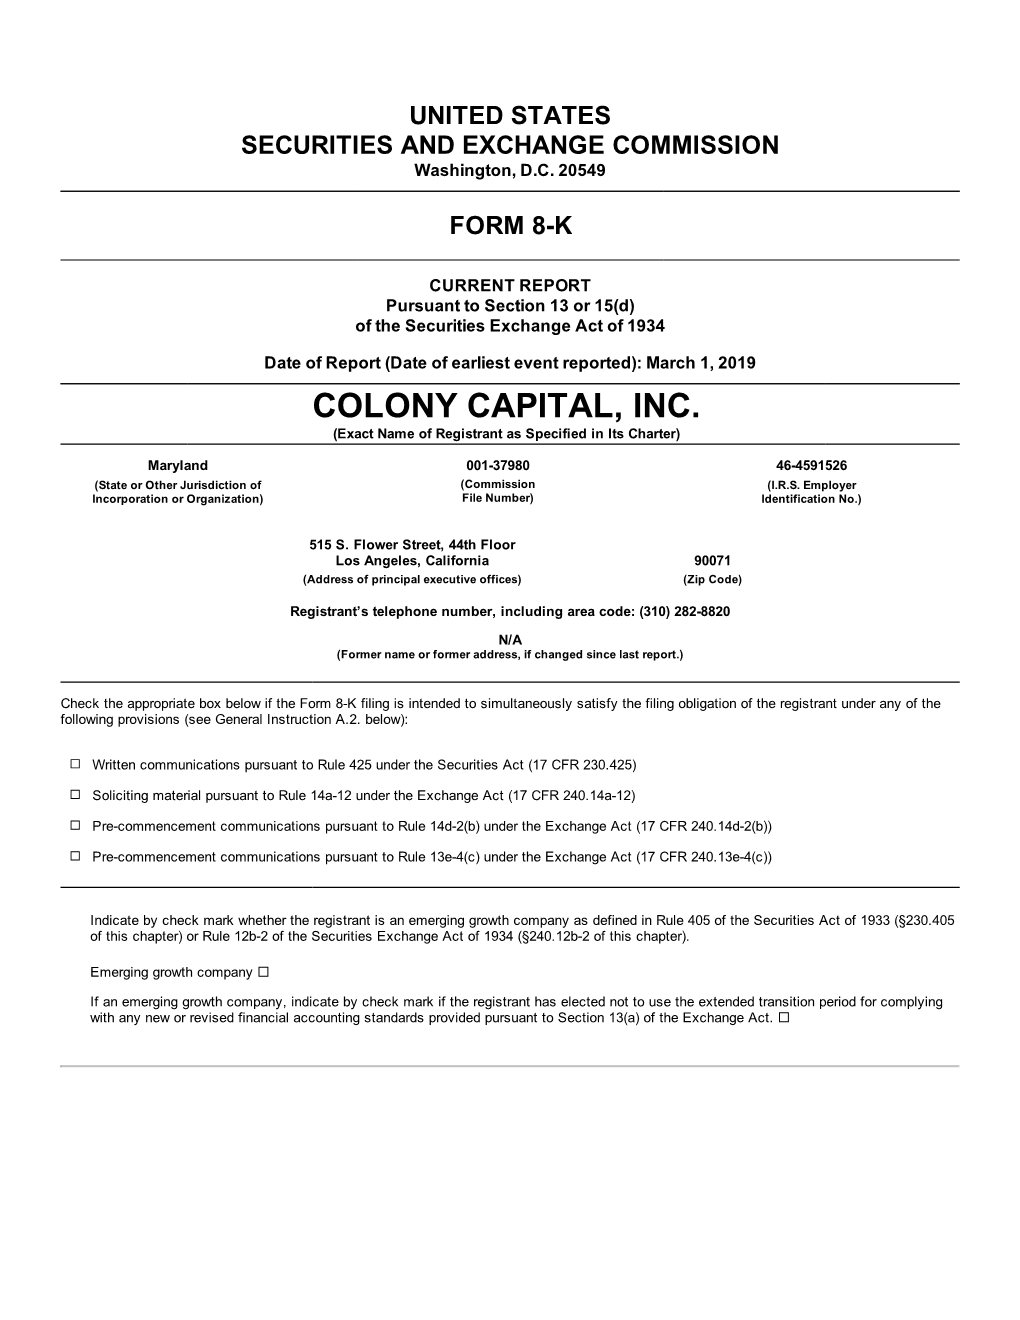 COLONY CAPITAL, INC. (Exact Name of Registrant As Specified in Its Charter)